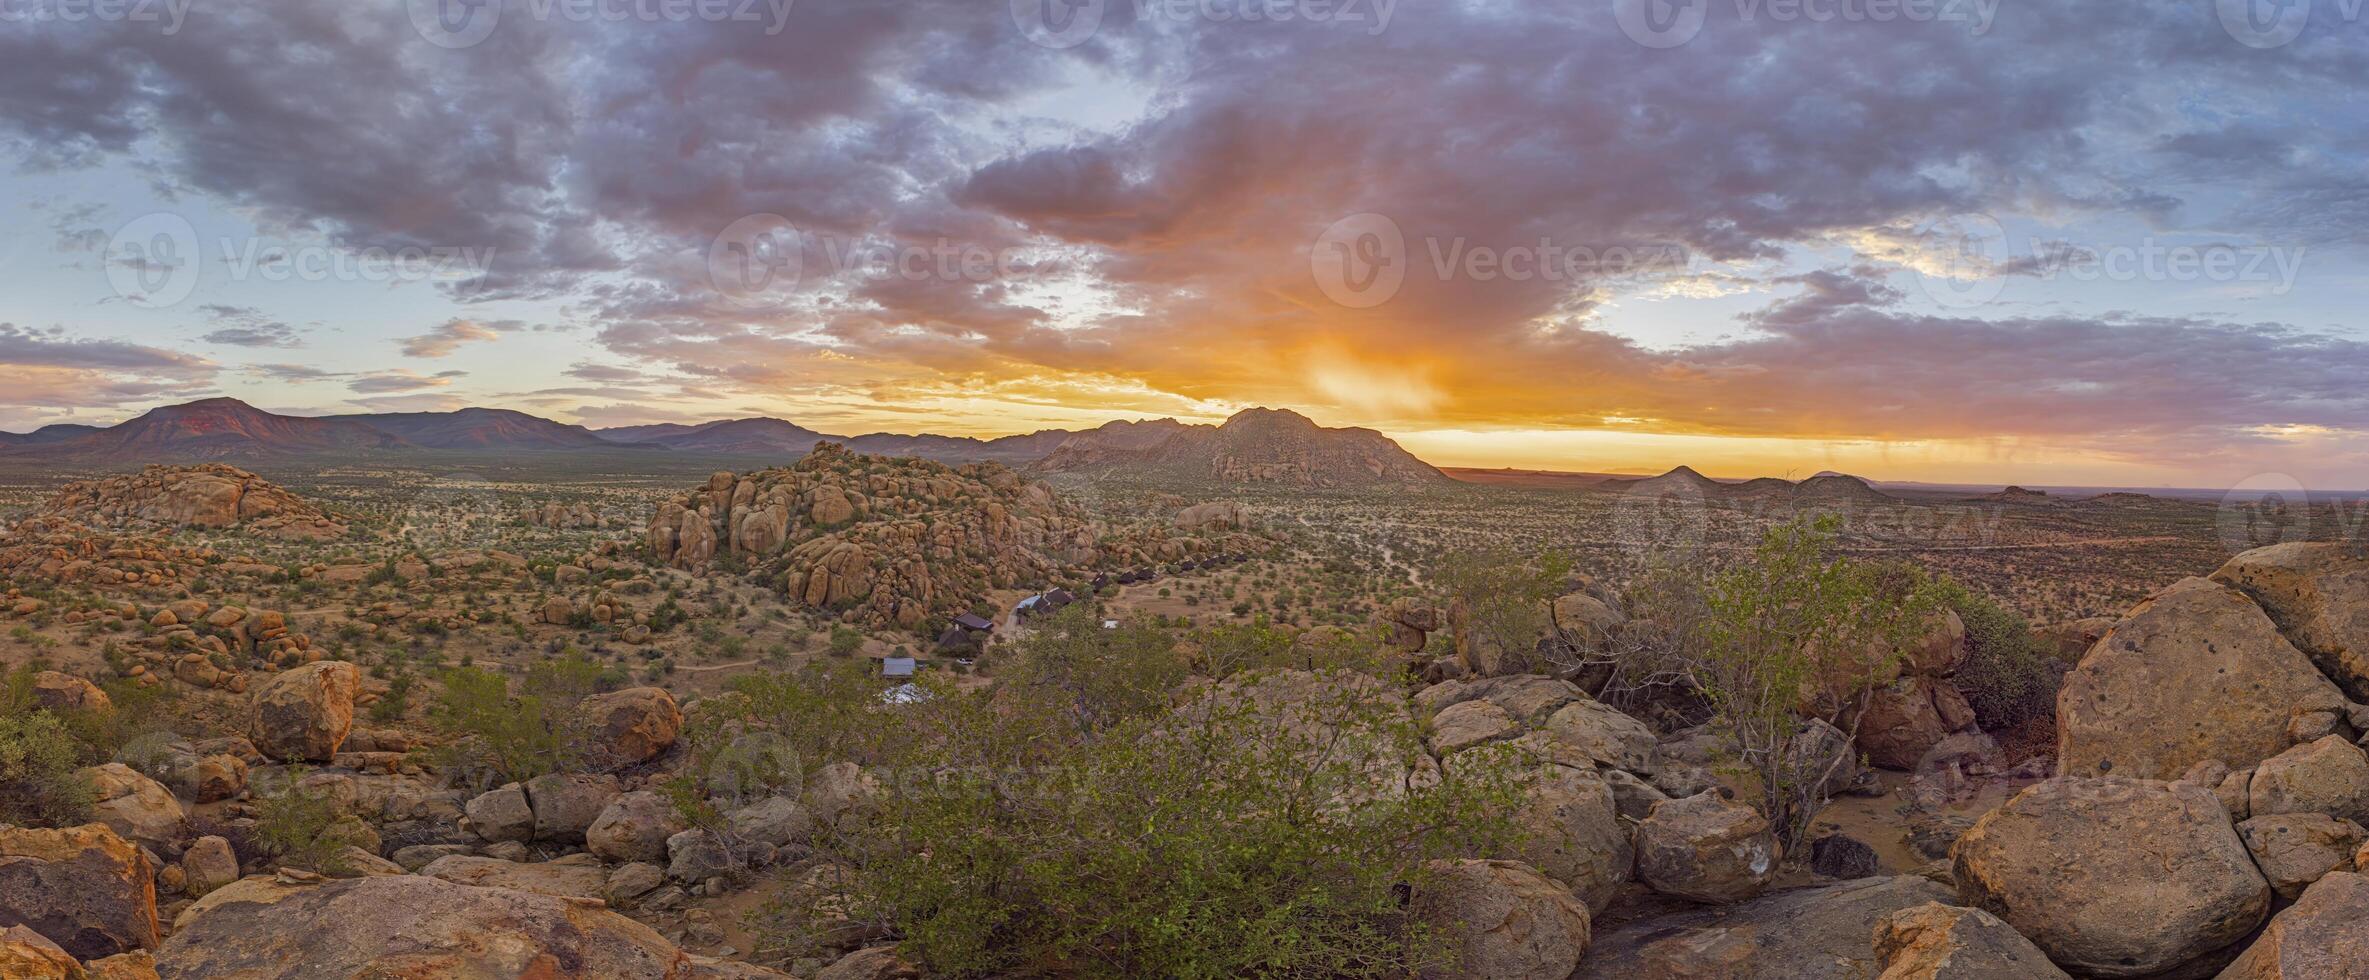 Panoramic picture of Damaraland in Namibia during sunset photo